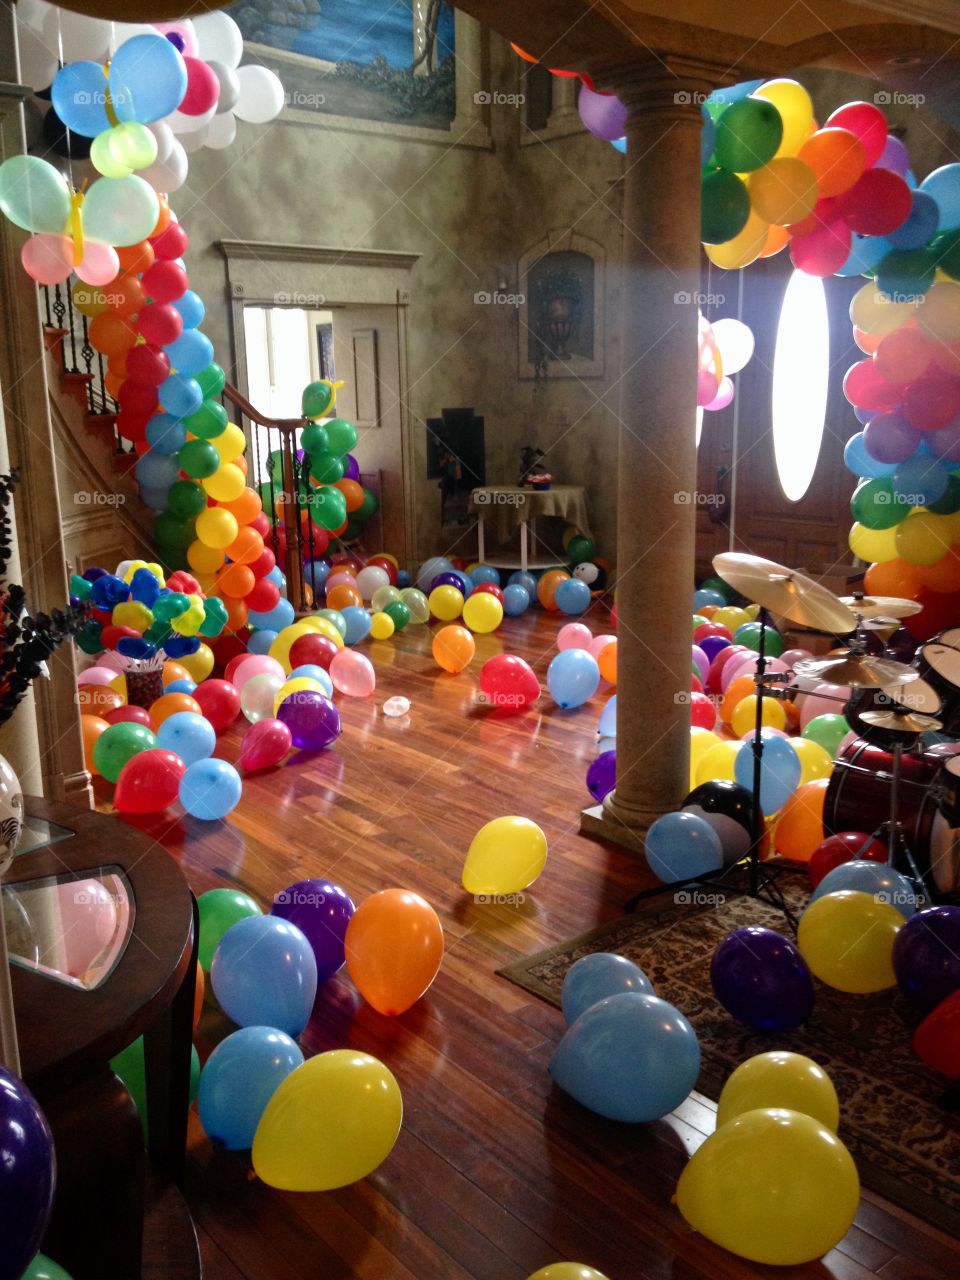 Room filled with colorful balloons for kids birthday party